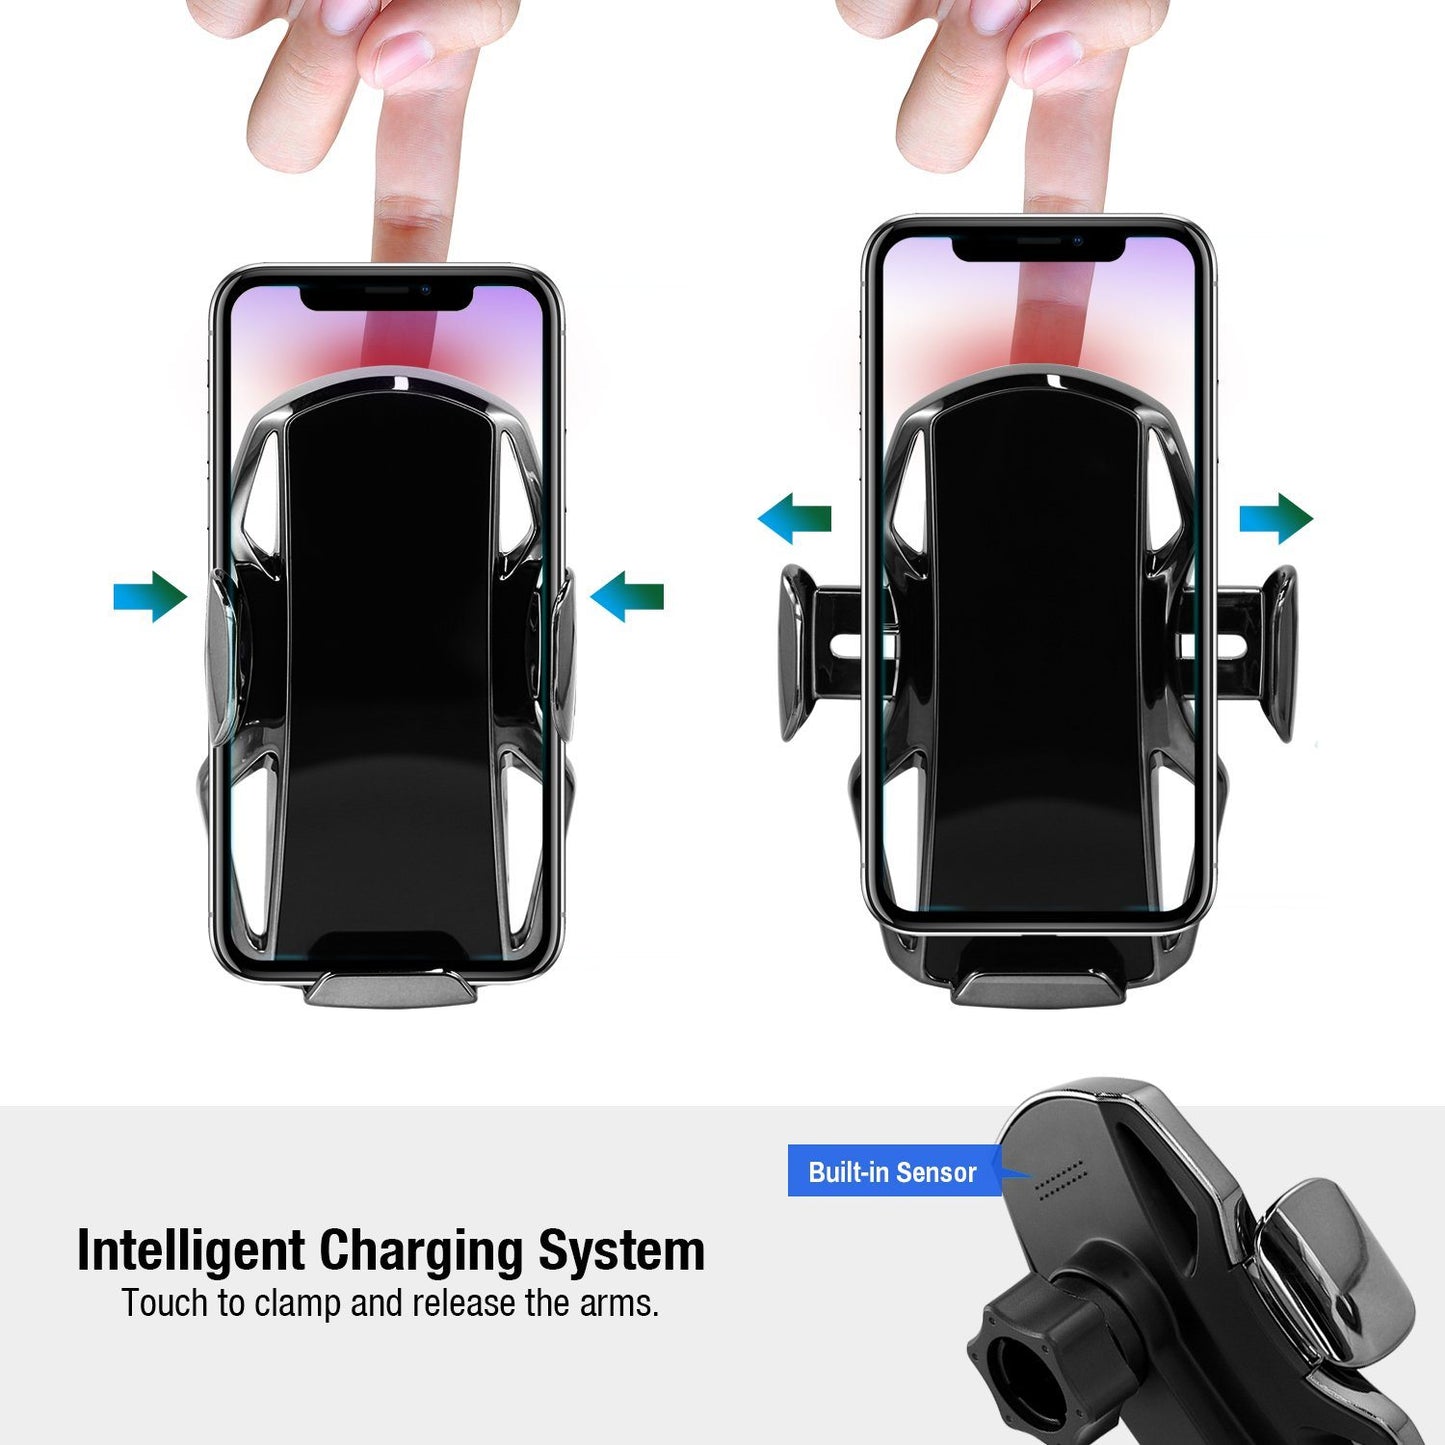 MCM-958 Qi Fast Charging Car Mount Holder - Power - Jabees Store - jabeesstore